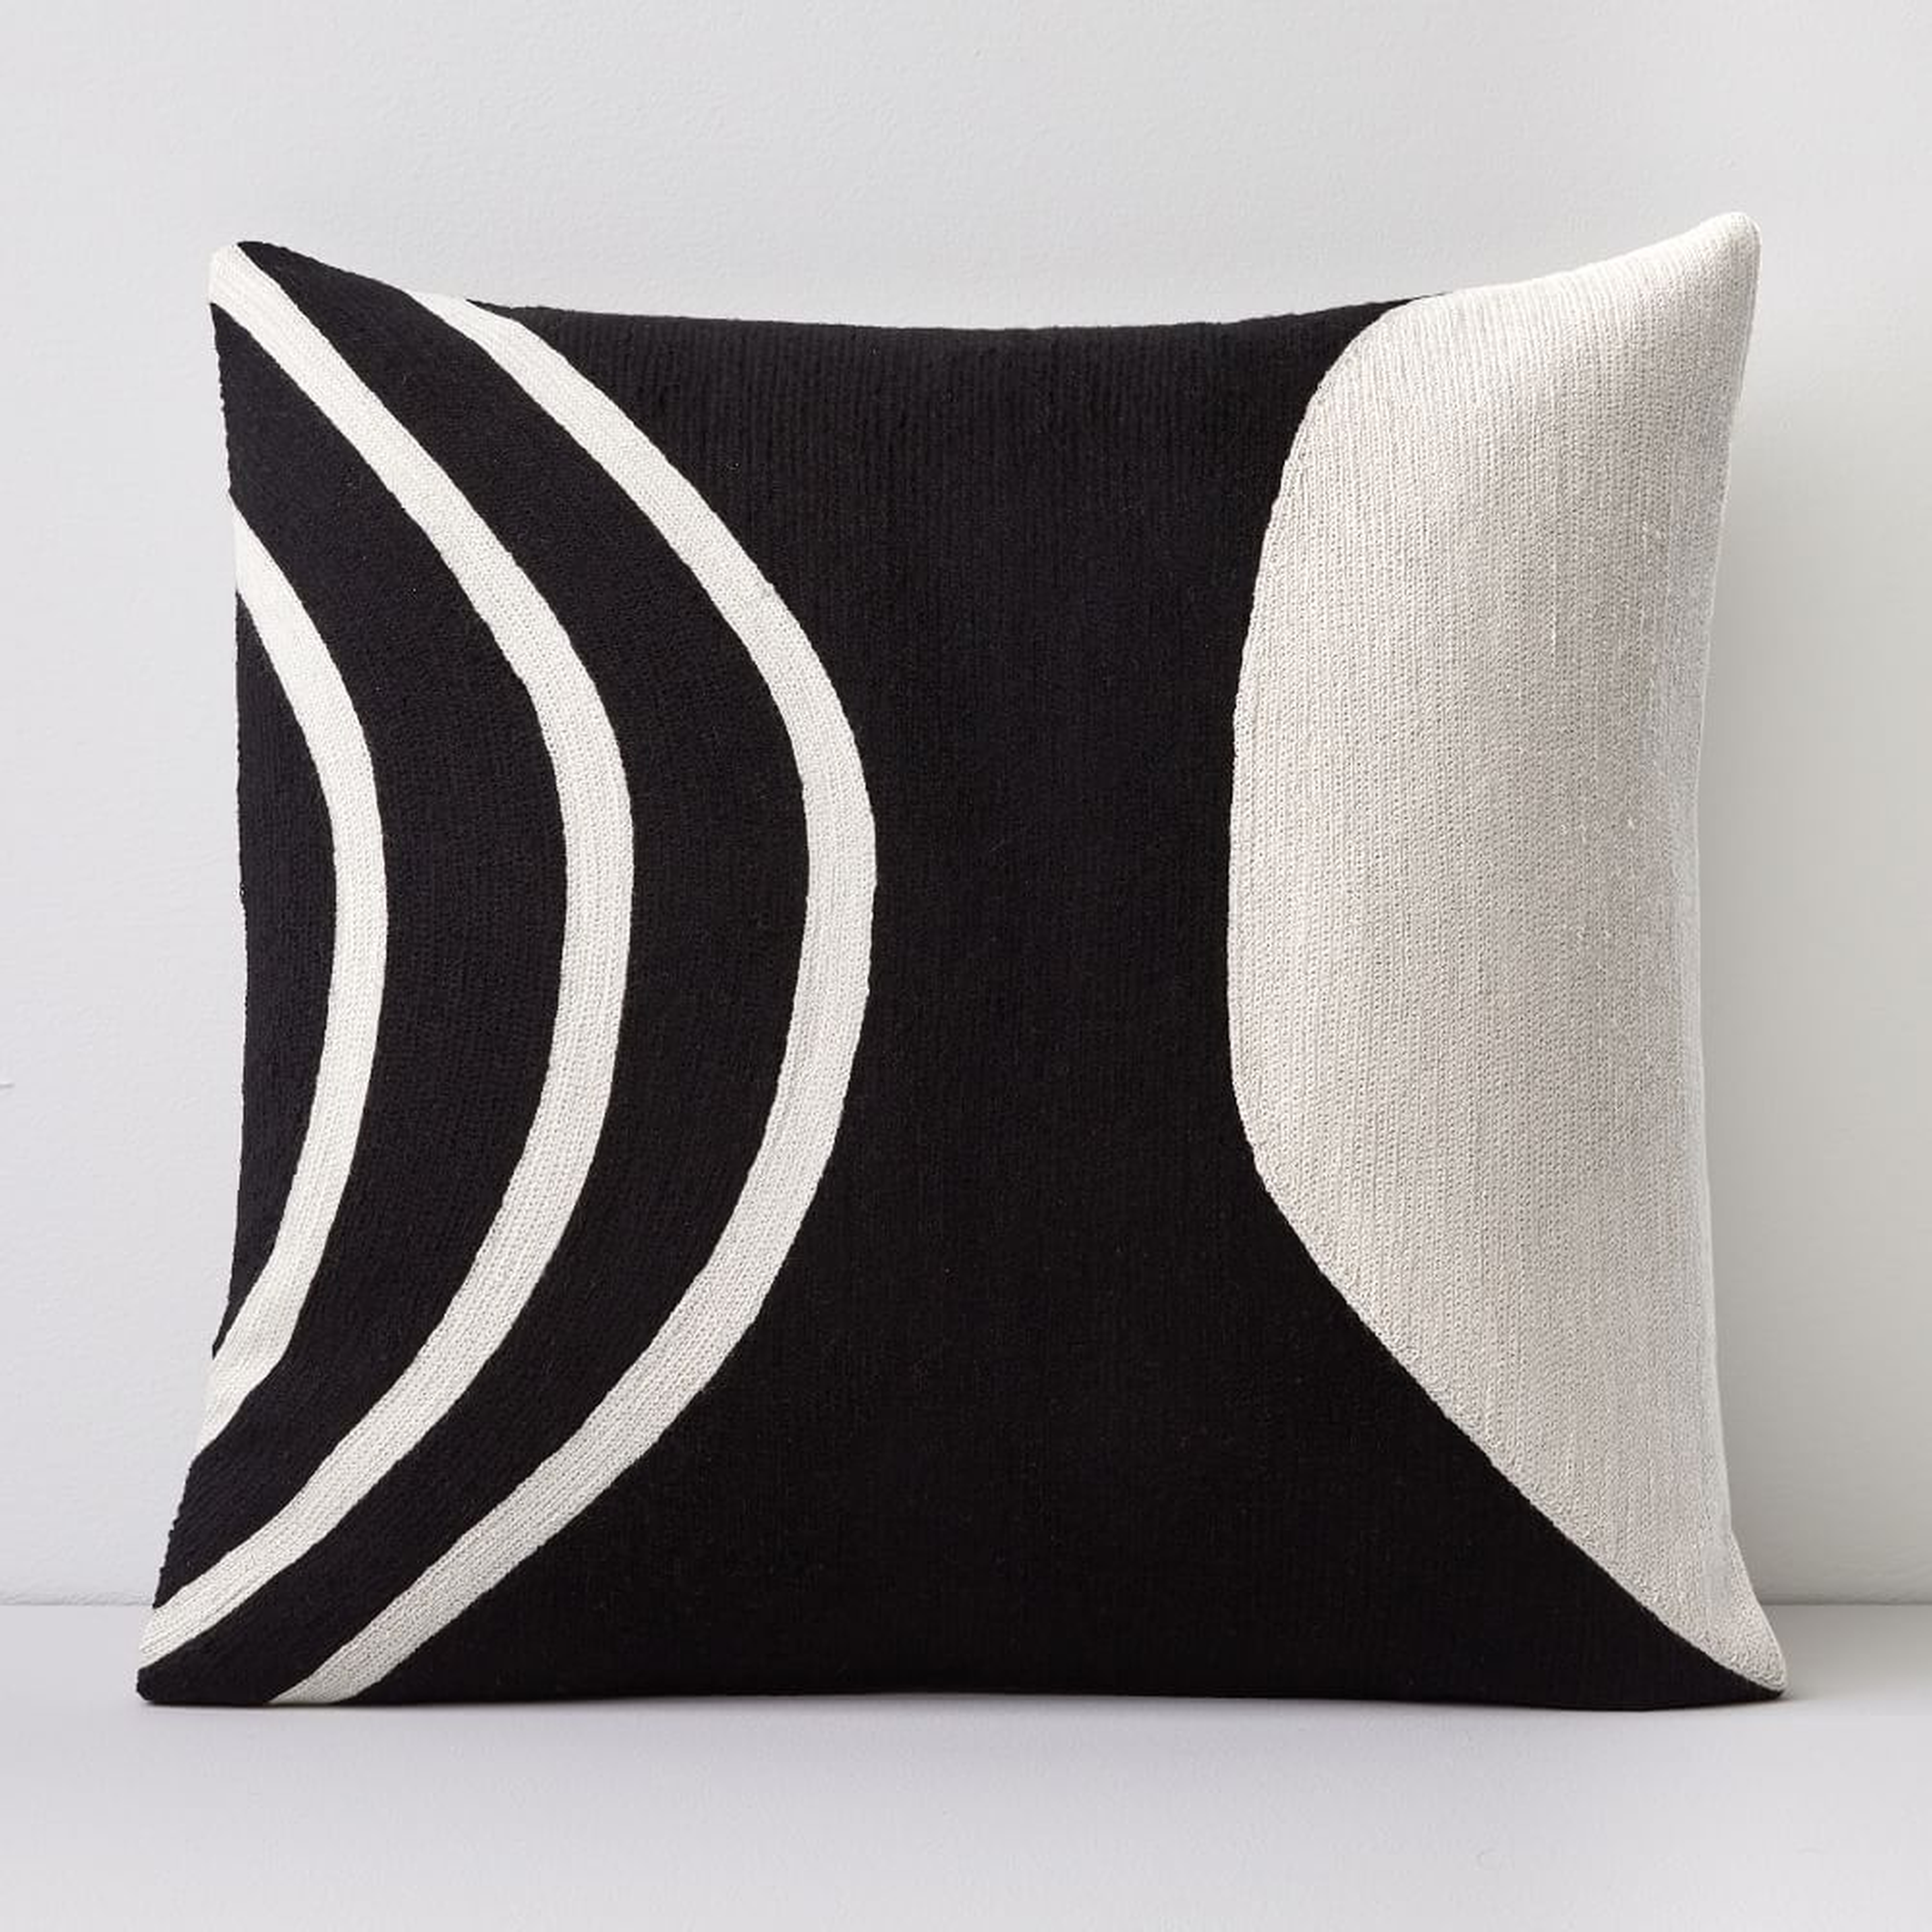 Crewel Rounded Pillow Cover, Black, 20"x20" - West Elm